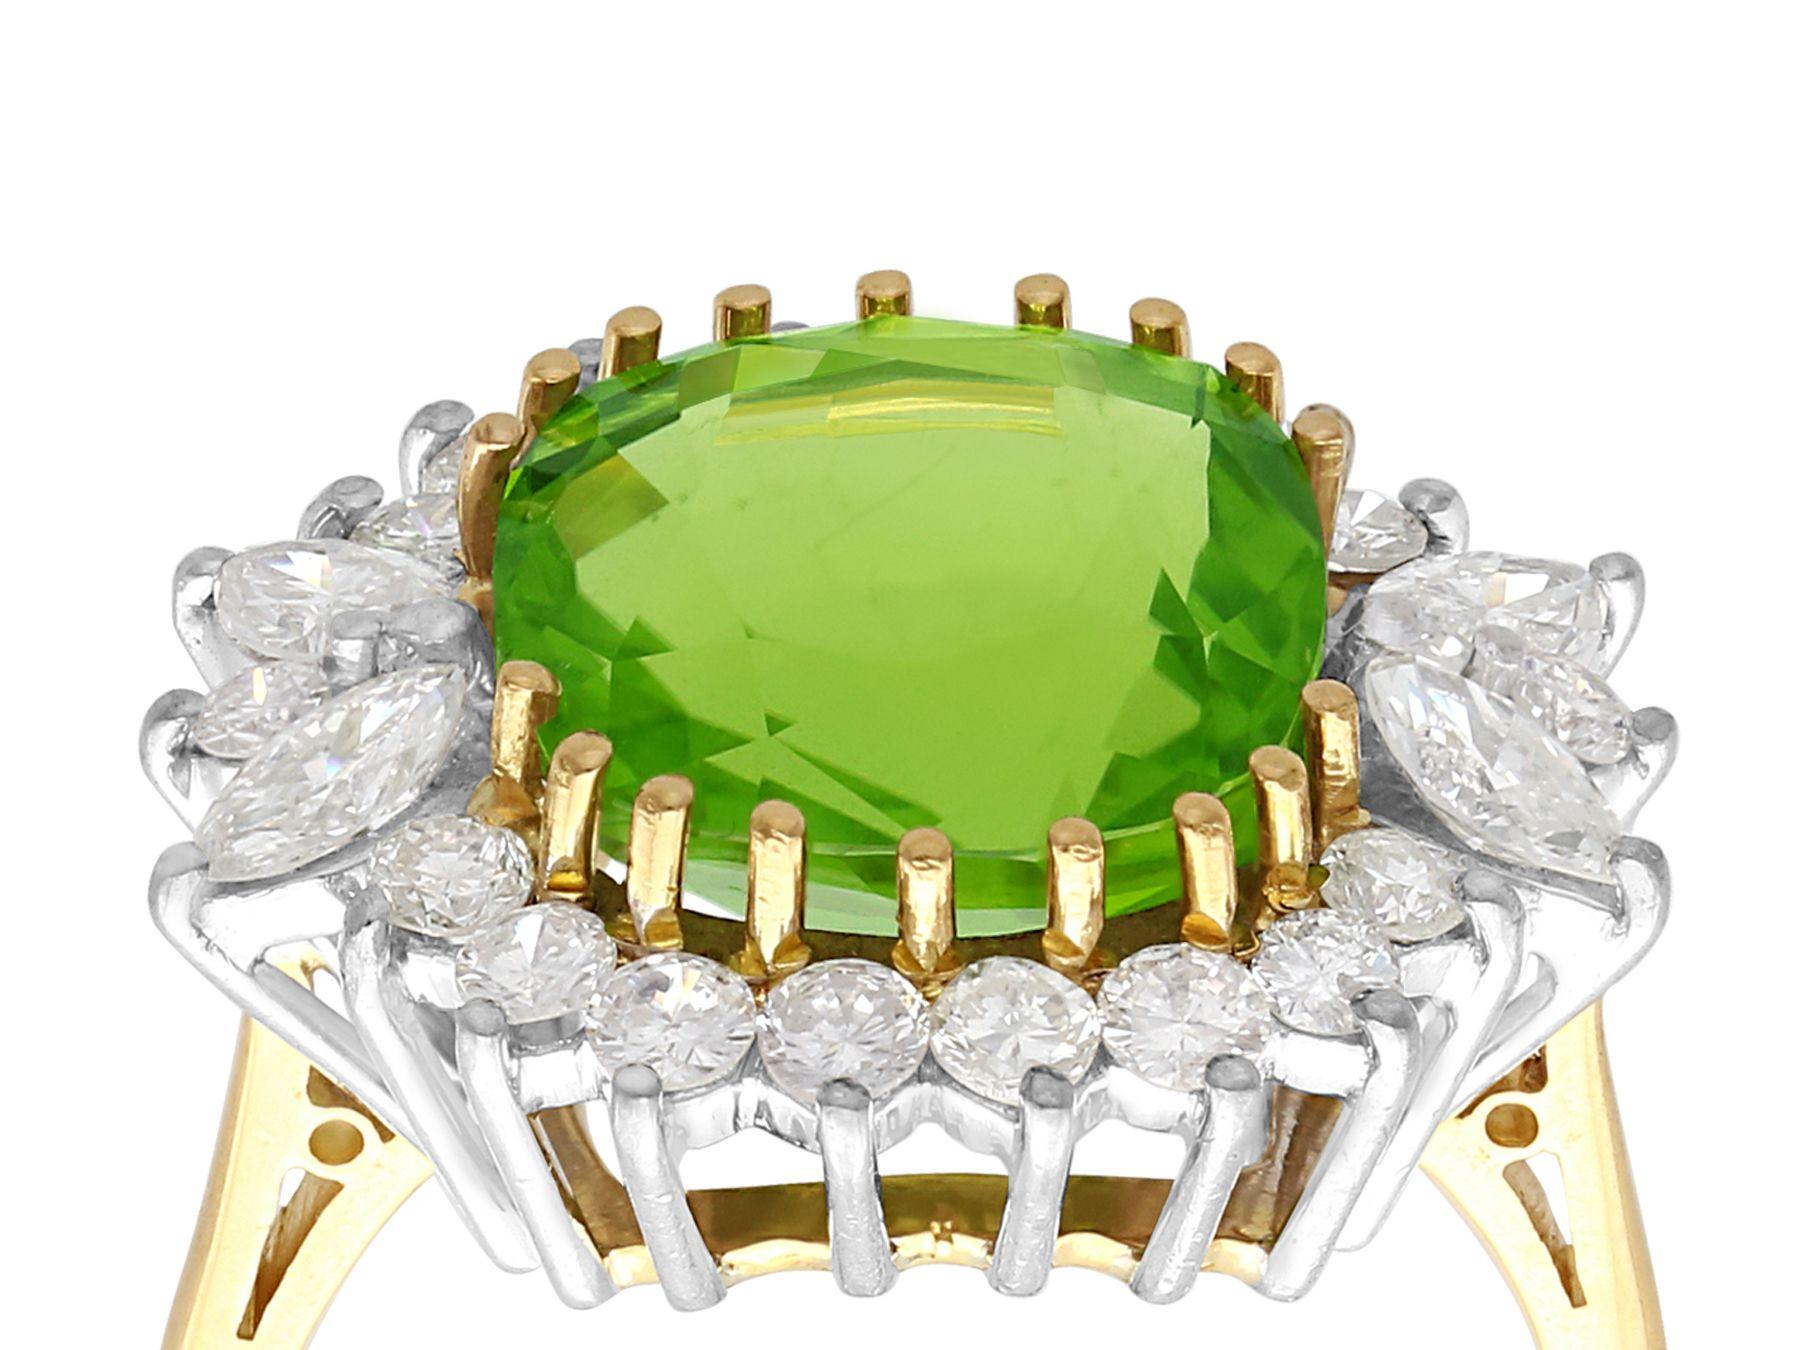 A stunning antique 7.80 carat peridot and 1.36 carat diamond, 18 karat yellow gold and white gold set dress ring; part of our diverse antique jewelry collections.

This stunning, fine and impressive antique ring has been crafted in 18k yellow gold